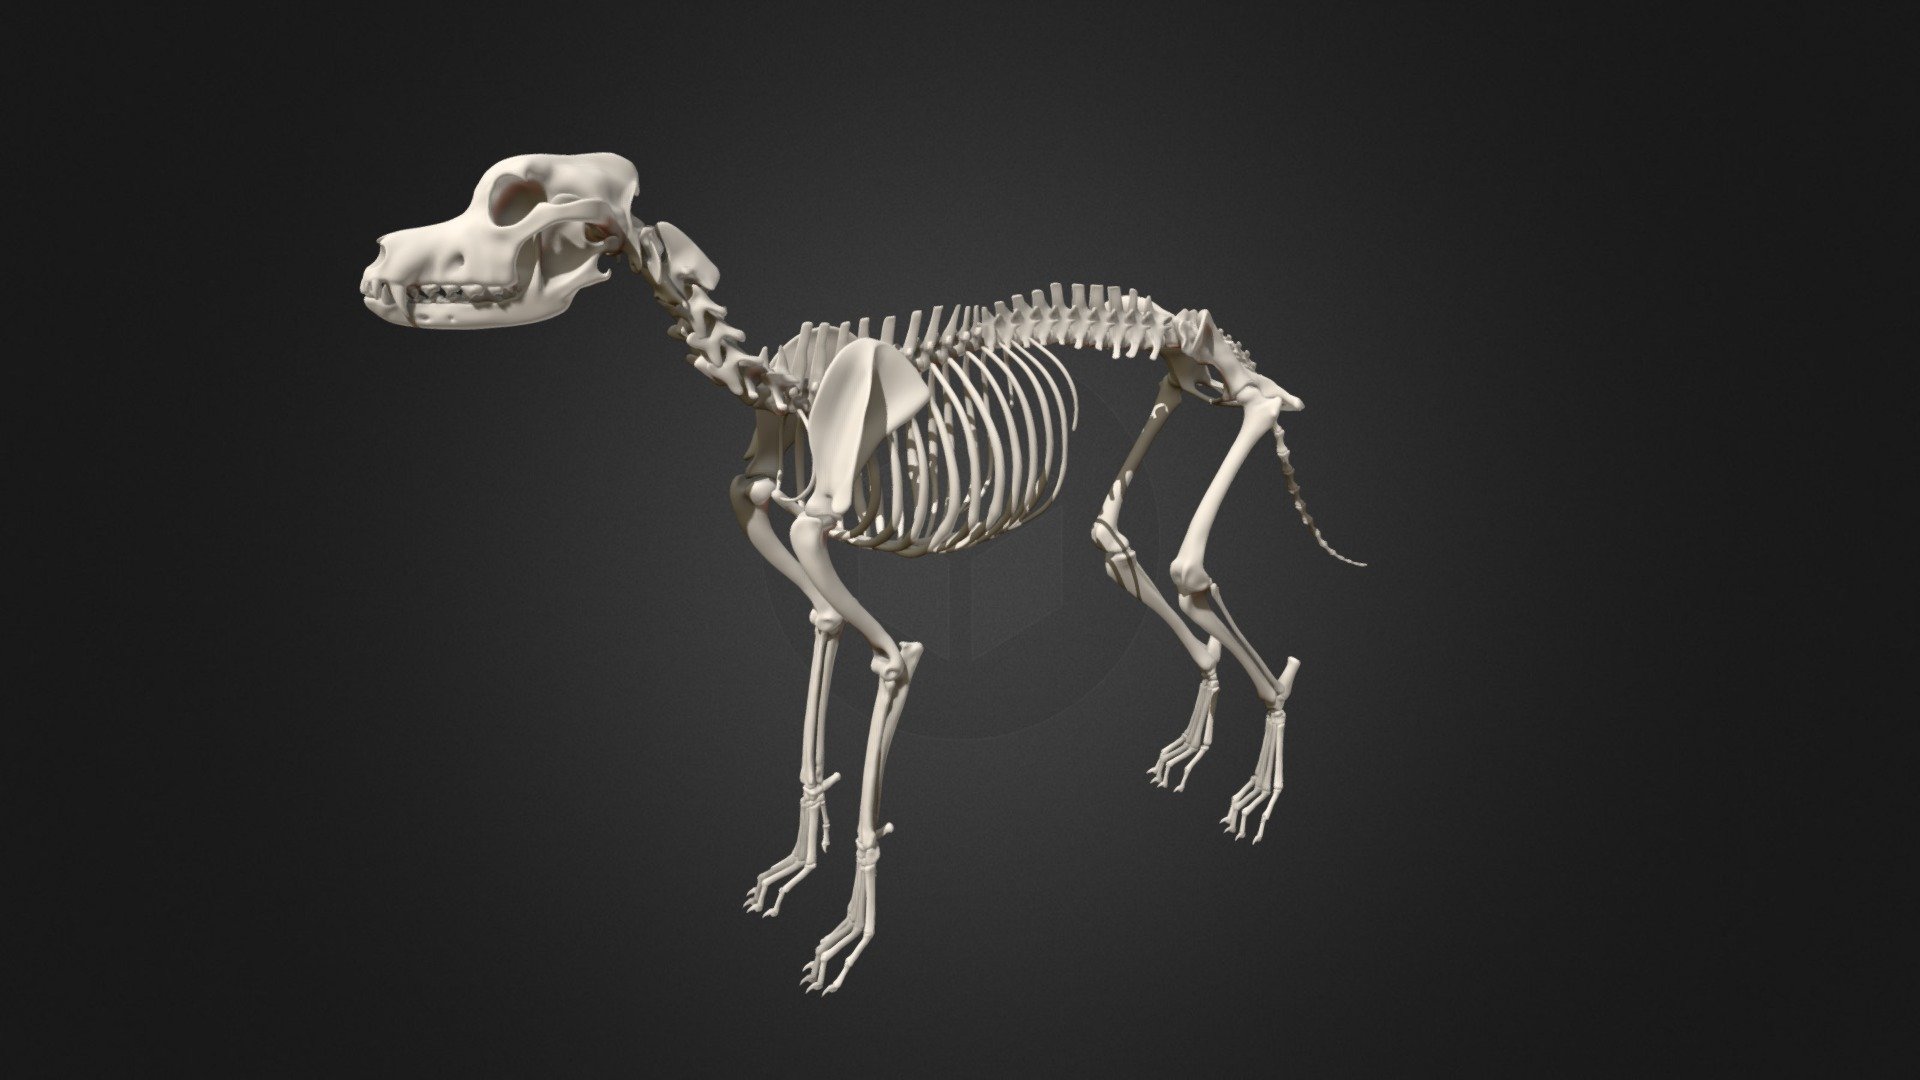 This Great Dane skeleton was a study project of mine to better understand canine anatomy. I used a range of anatomical literature and images to make sure I get the most accurate result possible (I recommend Ellenberger's &ldquo;Atlas of Animal Anatomy for Artists